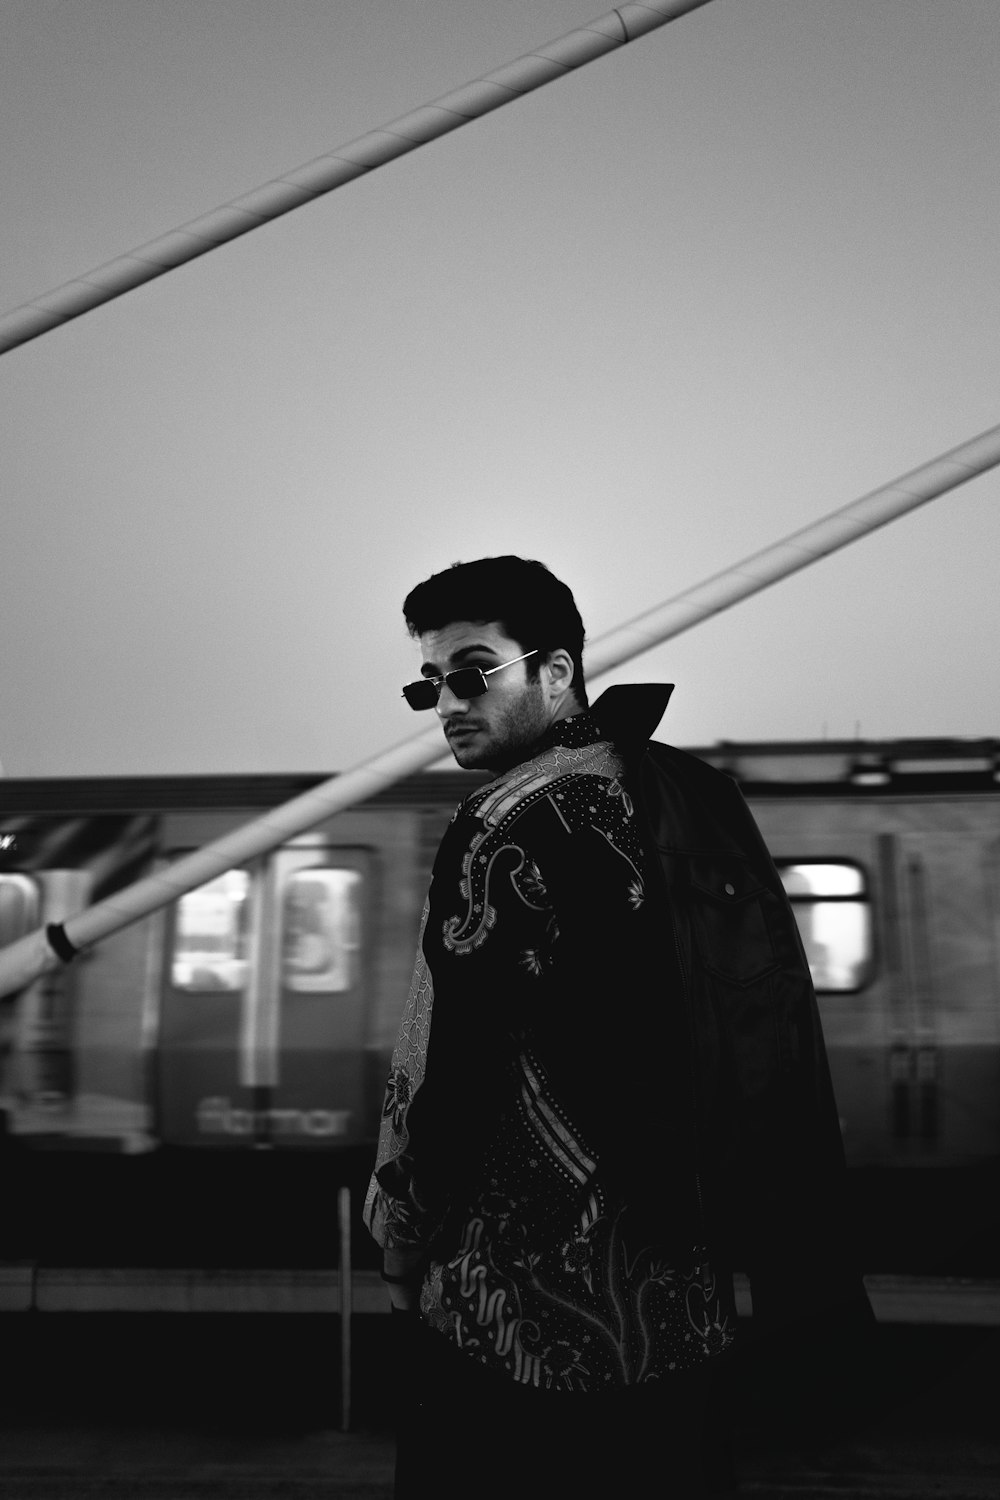 a man with sunglasses standing in front of a train